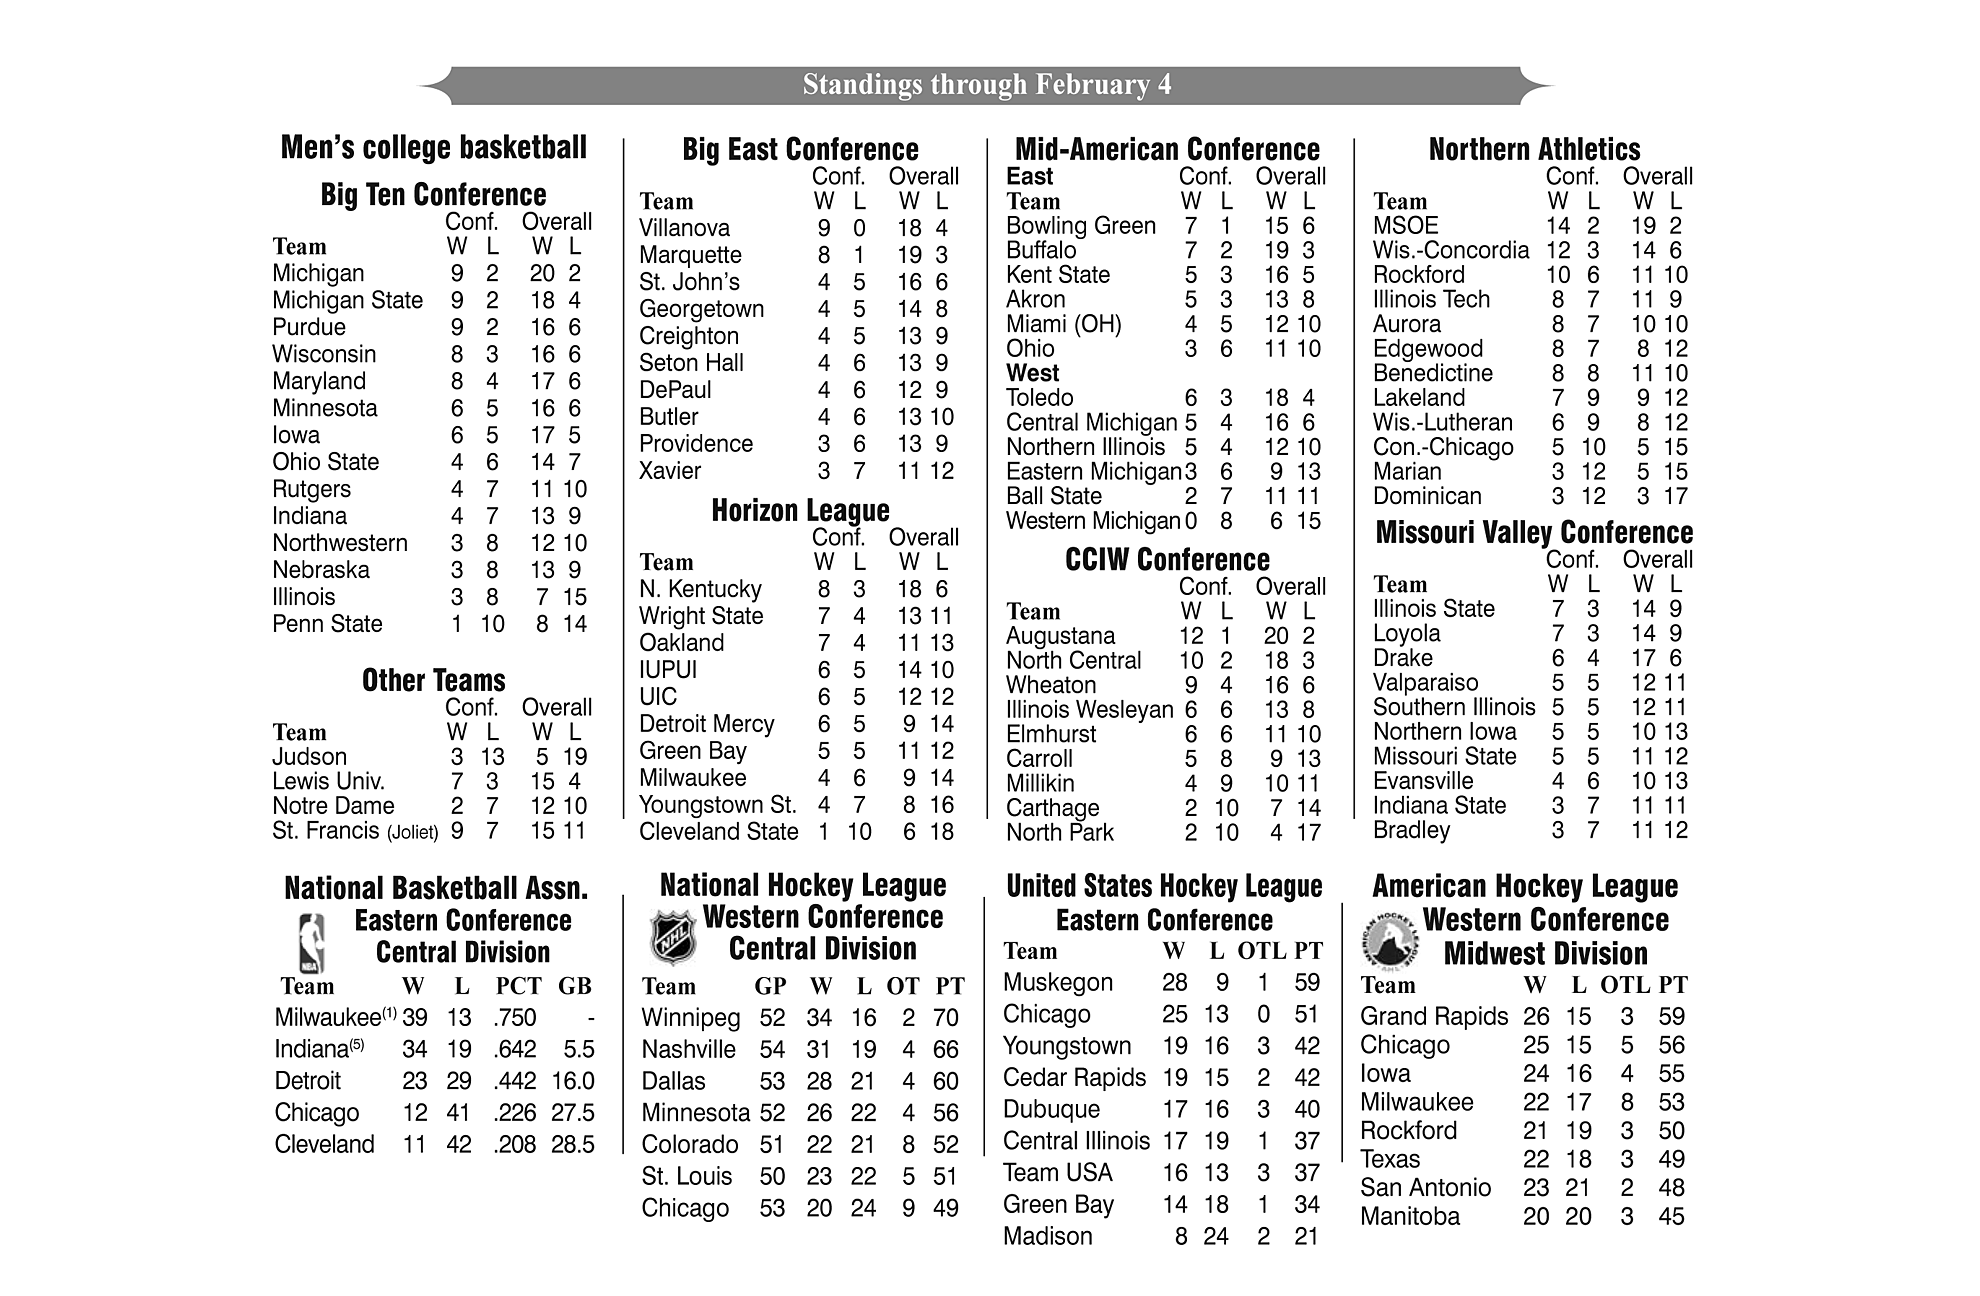 Professional Basketball and Hockey Standings Through February 4, 2019